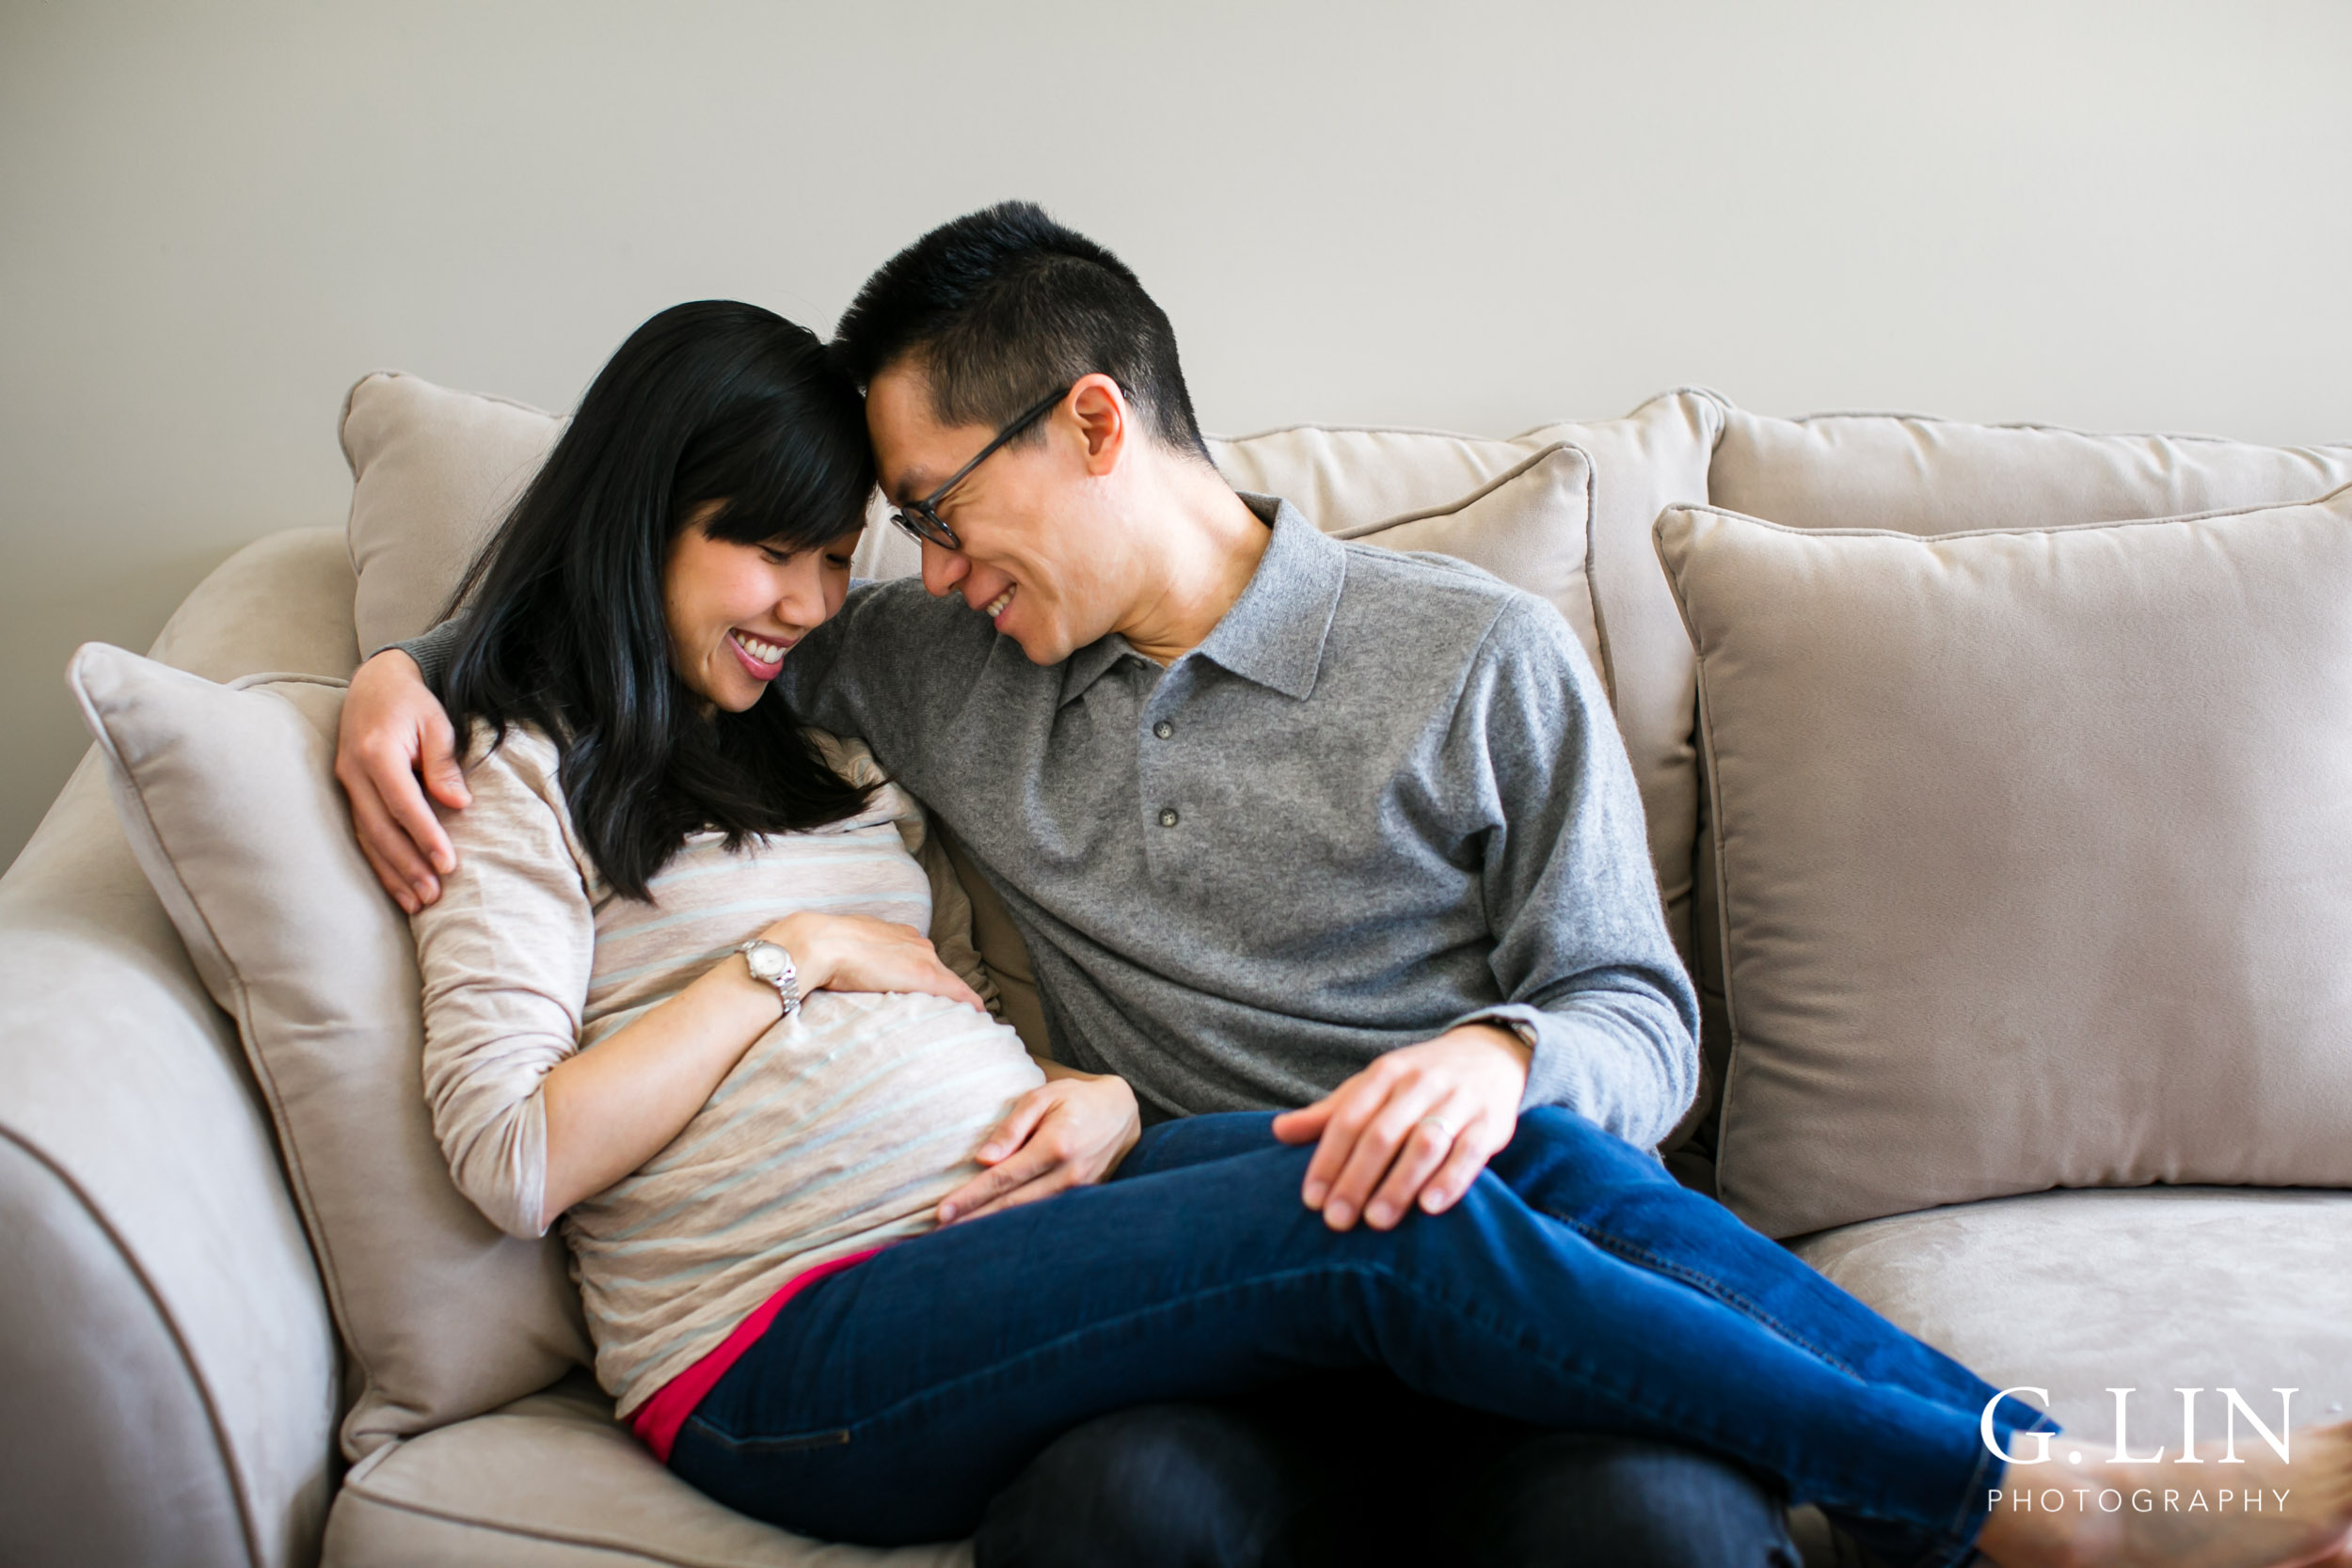 Durham Maternity Photography | G. Lin Photography | Couple sitting on couch and smiling